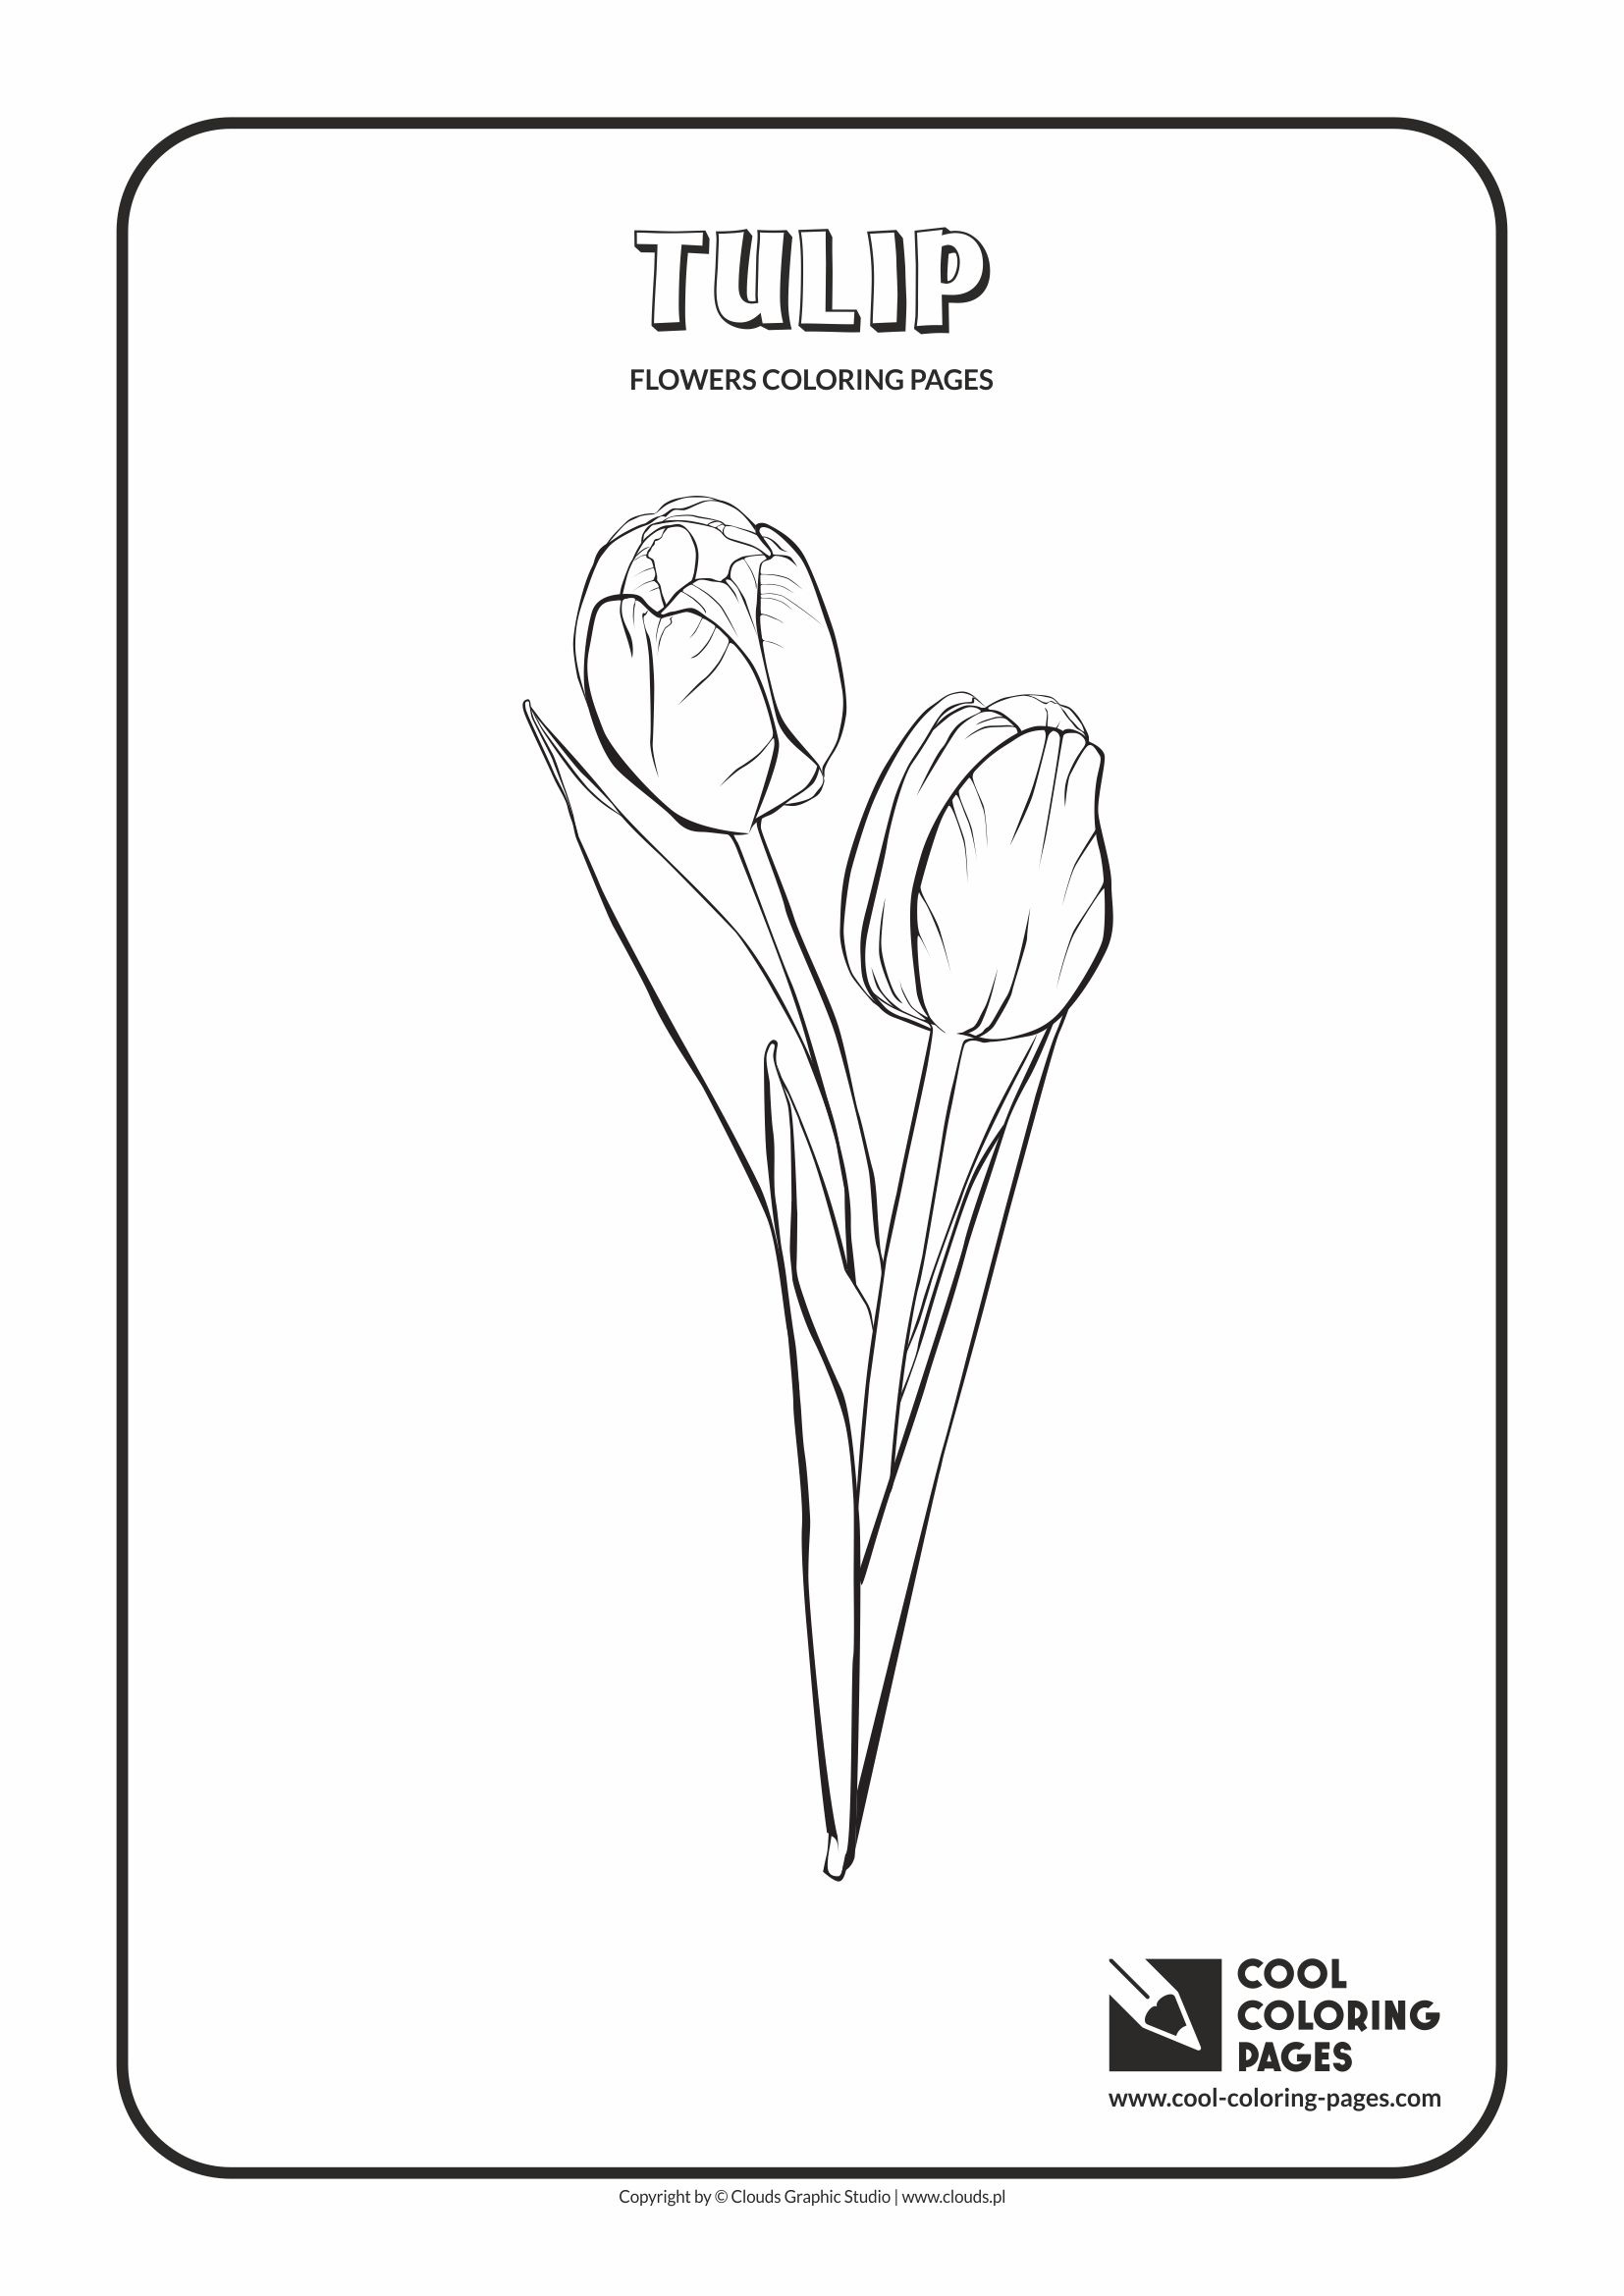 Cool Coloring Pages - Plants / Tulip / Coloring page with tulip